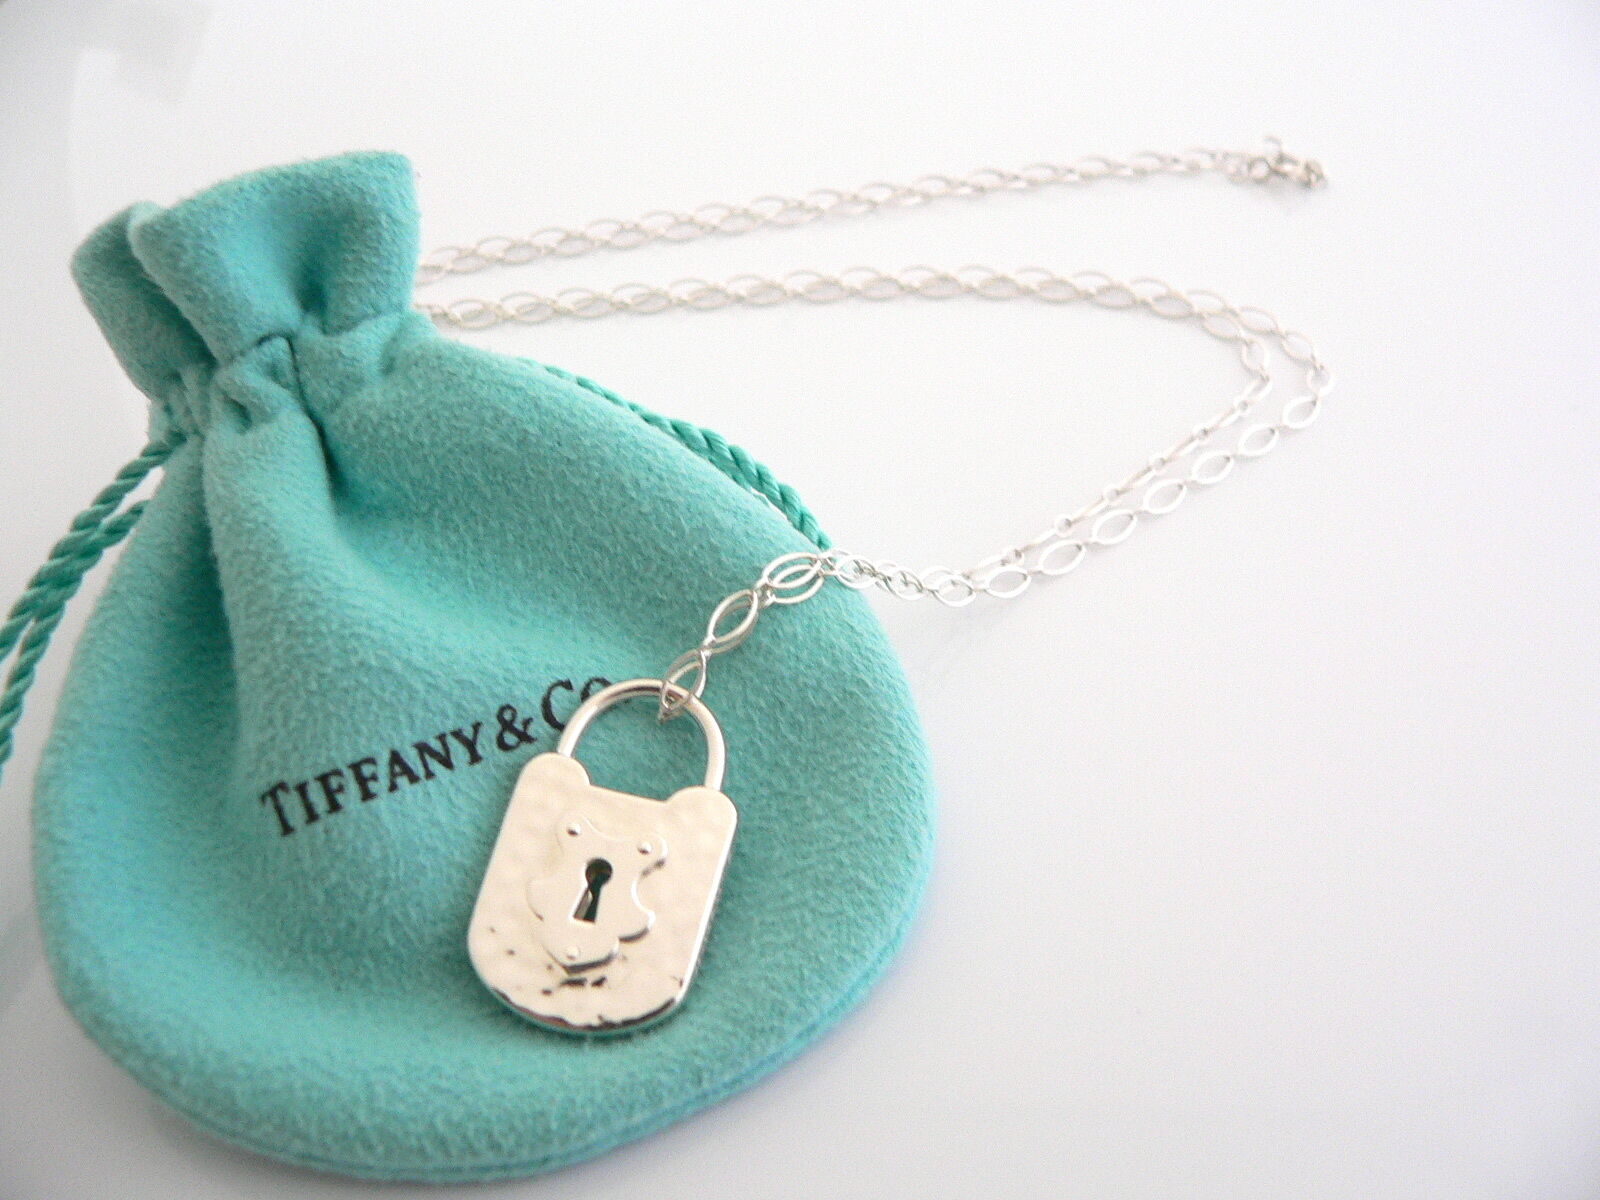 Authentic Tiffany & Co. Silver and 18K Gold Round Mini Lock Pendant Necklace  | Shop necklaces, Pendant, Tiffany & co.